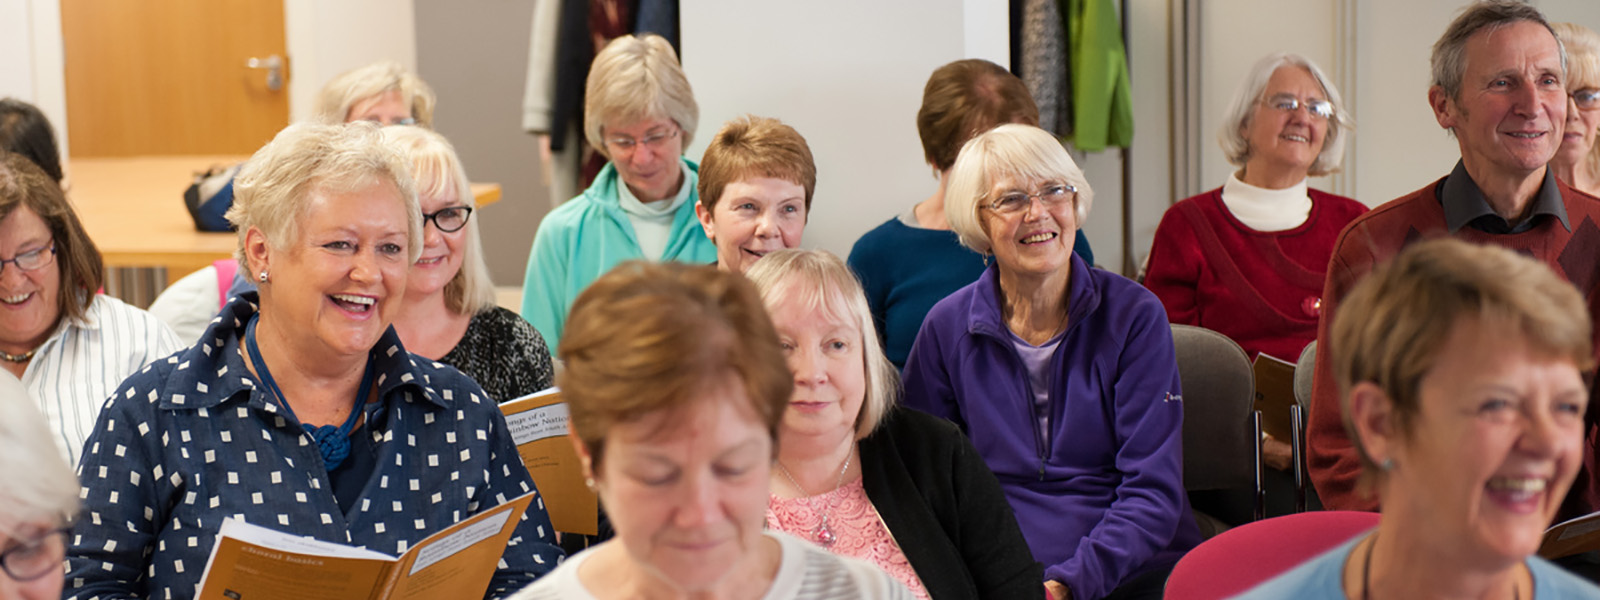 Morning choir singers at the Centre for Lifelong Learning